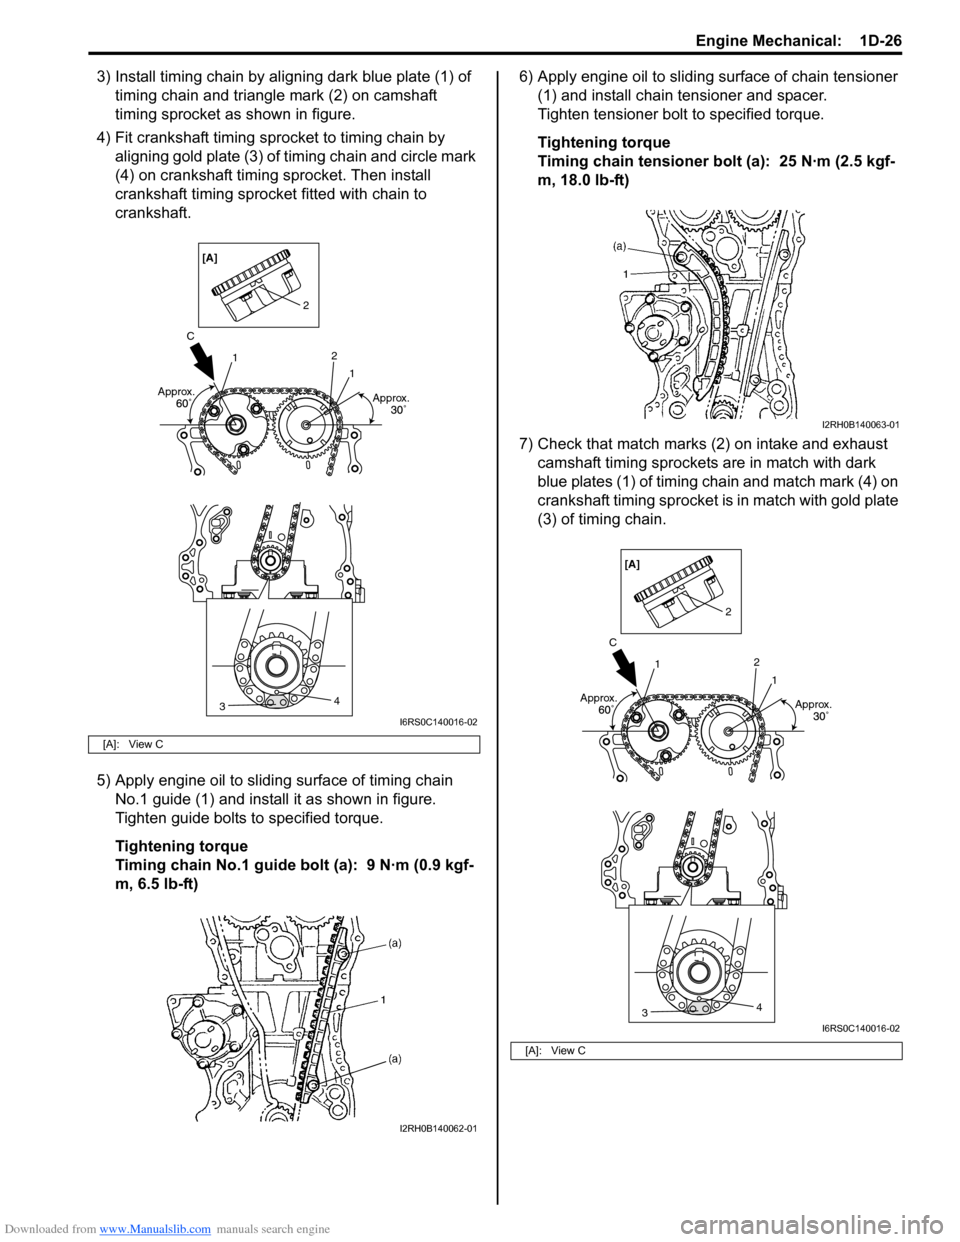 SUZUKI SWIFT 2005 2.G Service Workshop Manual Downloaded from www.Manualslib.com manuals search engine Engine Mechanical:  1D-26
3) Install timing chain by aligning dark blue plate (1) of timing chain and triangle mark (2) on camshaft 
timing spr